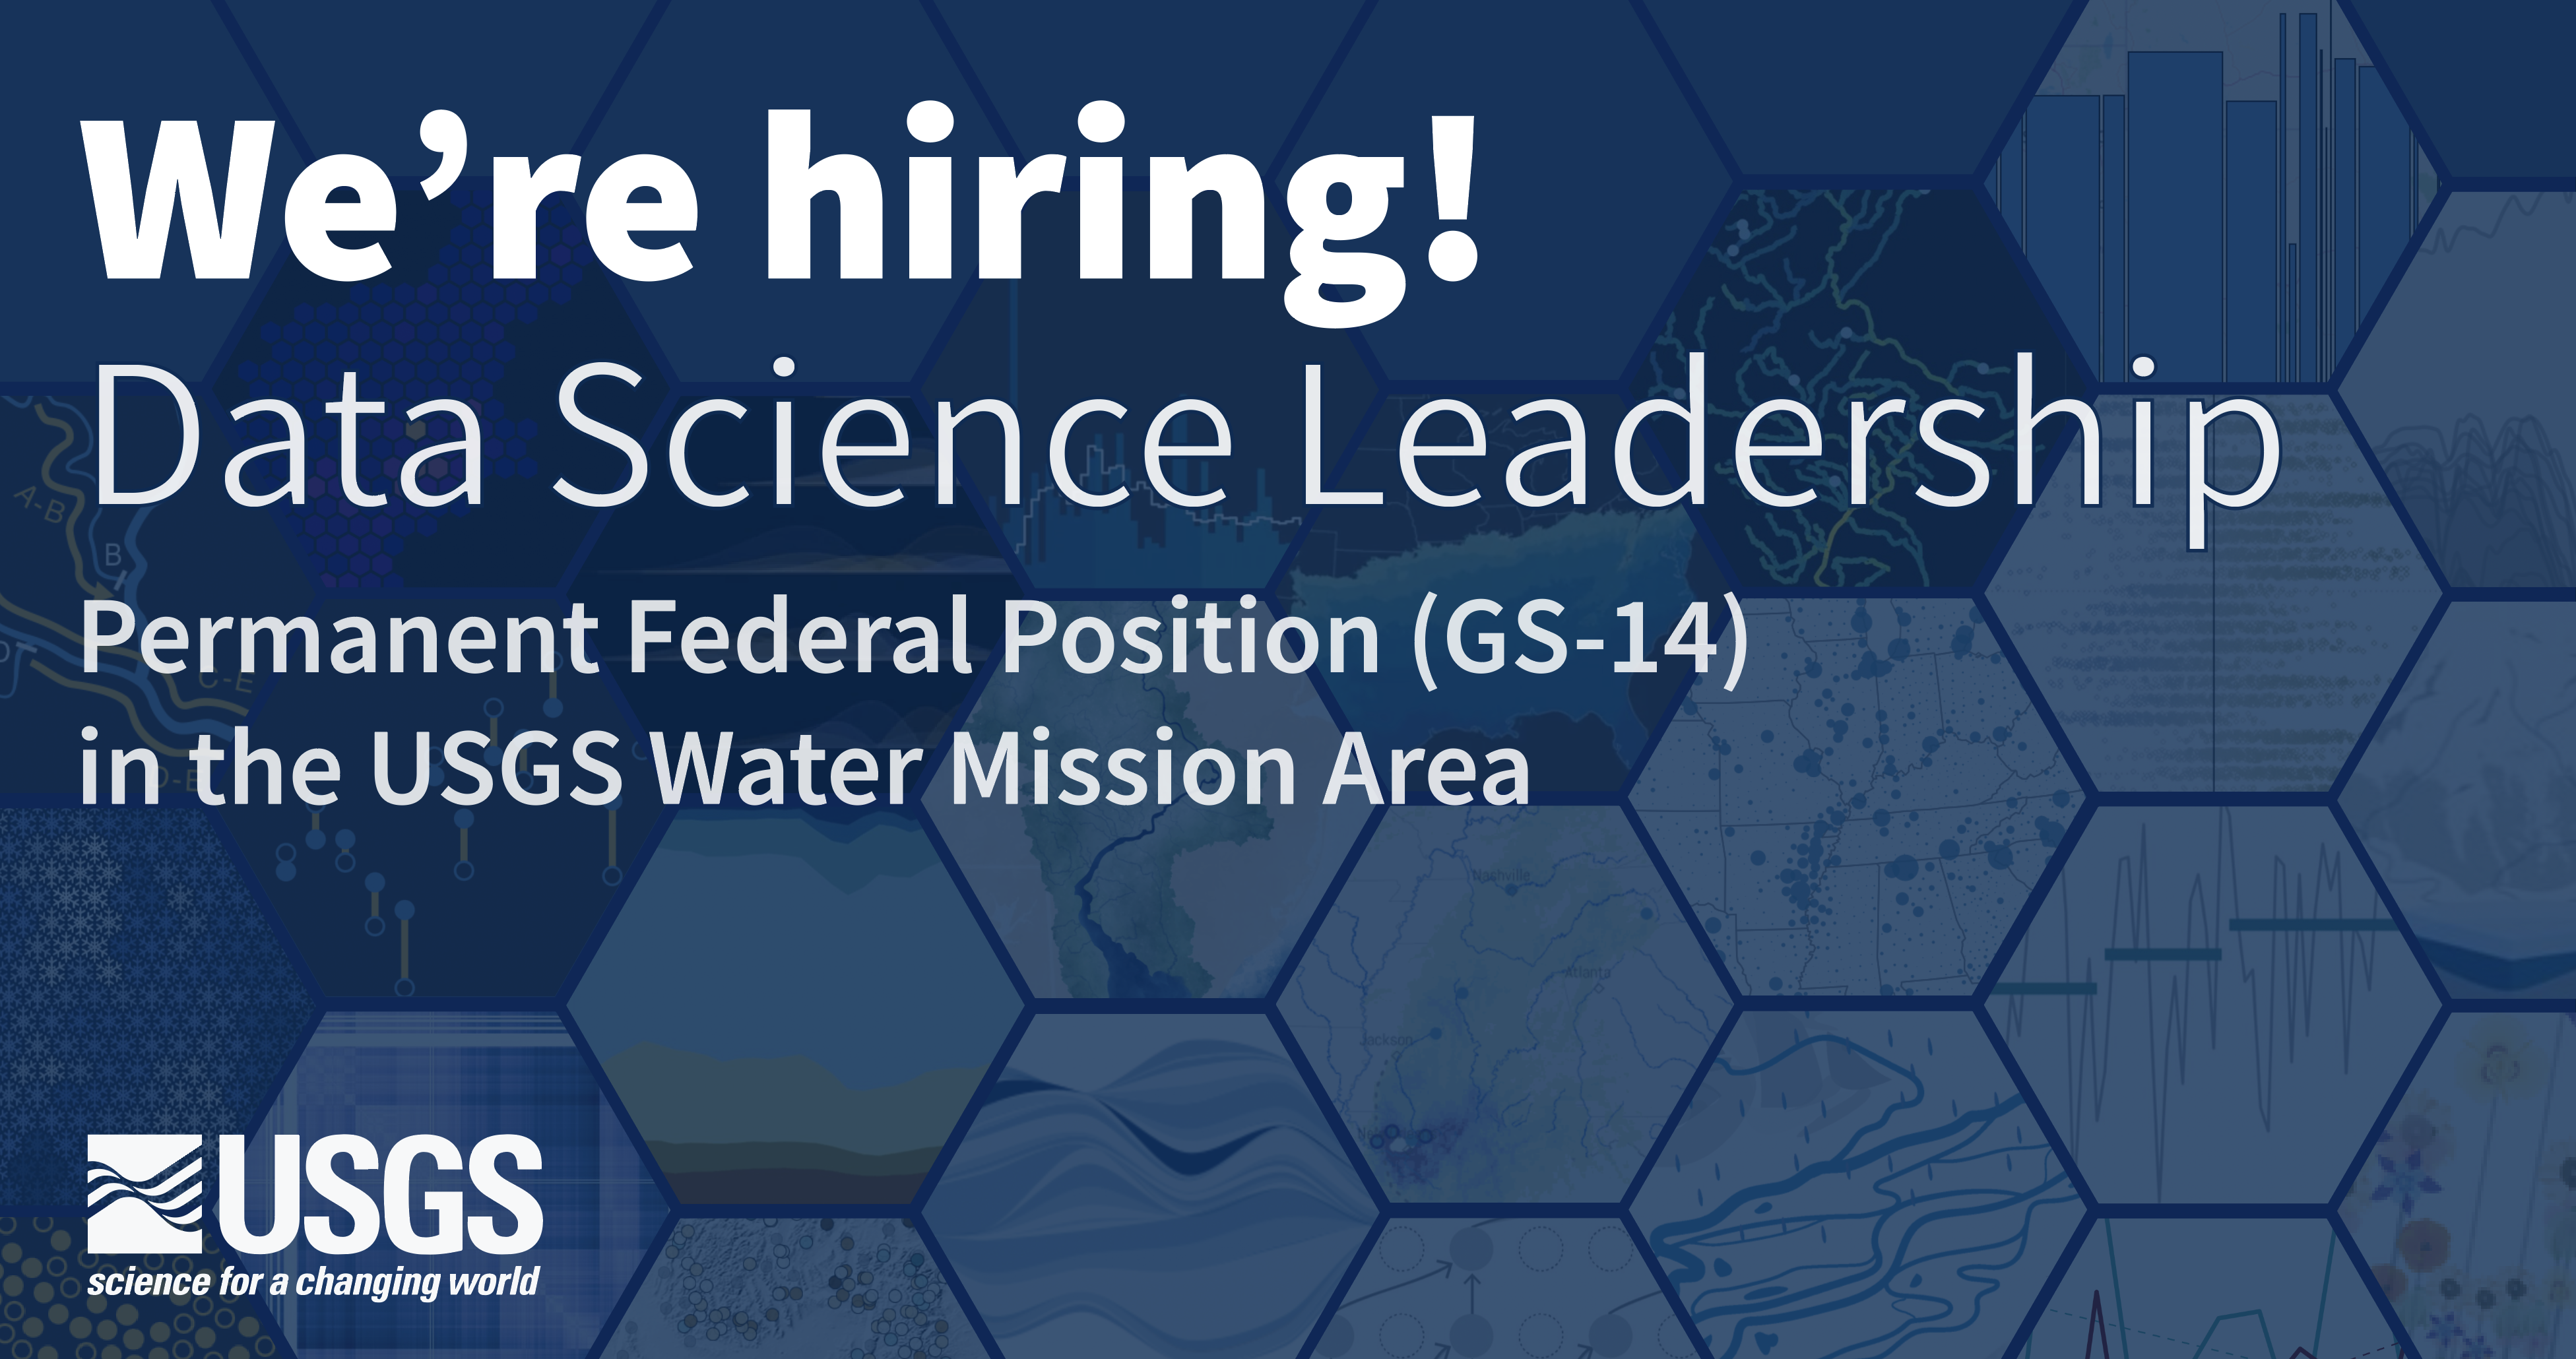 An banner announcing an upcoming hire for leadership of the Data Science Branch in the USGS Water Mission Area. This is a permanent federal position at GS14 with a really awesome group of people!